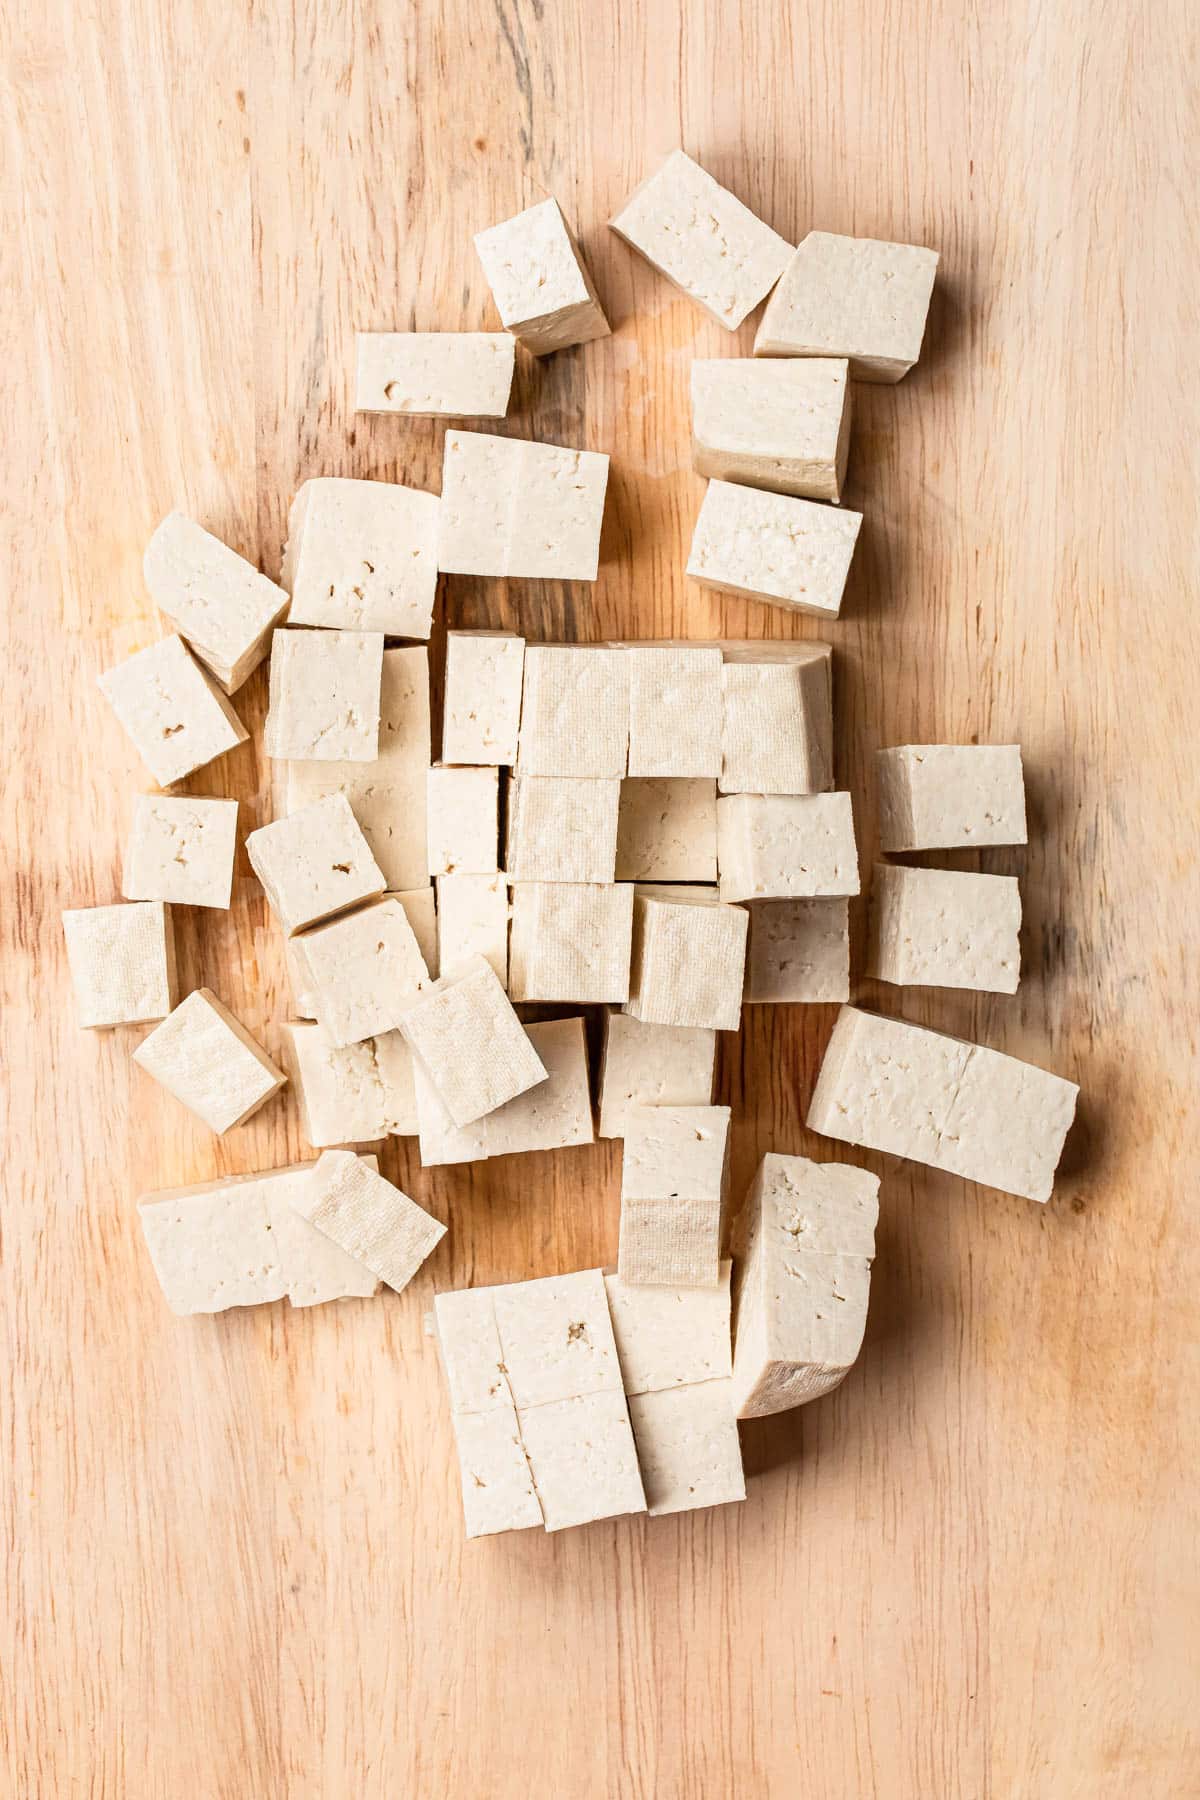 Extra firm tofu cut into cubes on a timber chopping board.